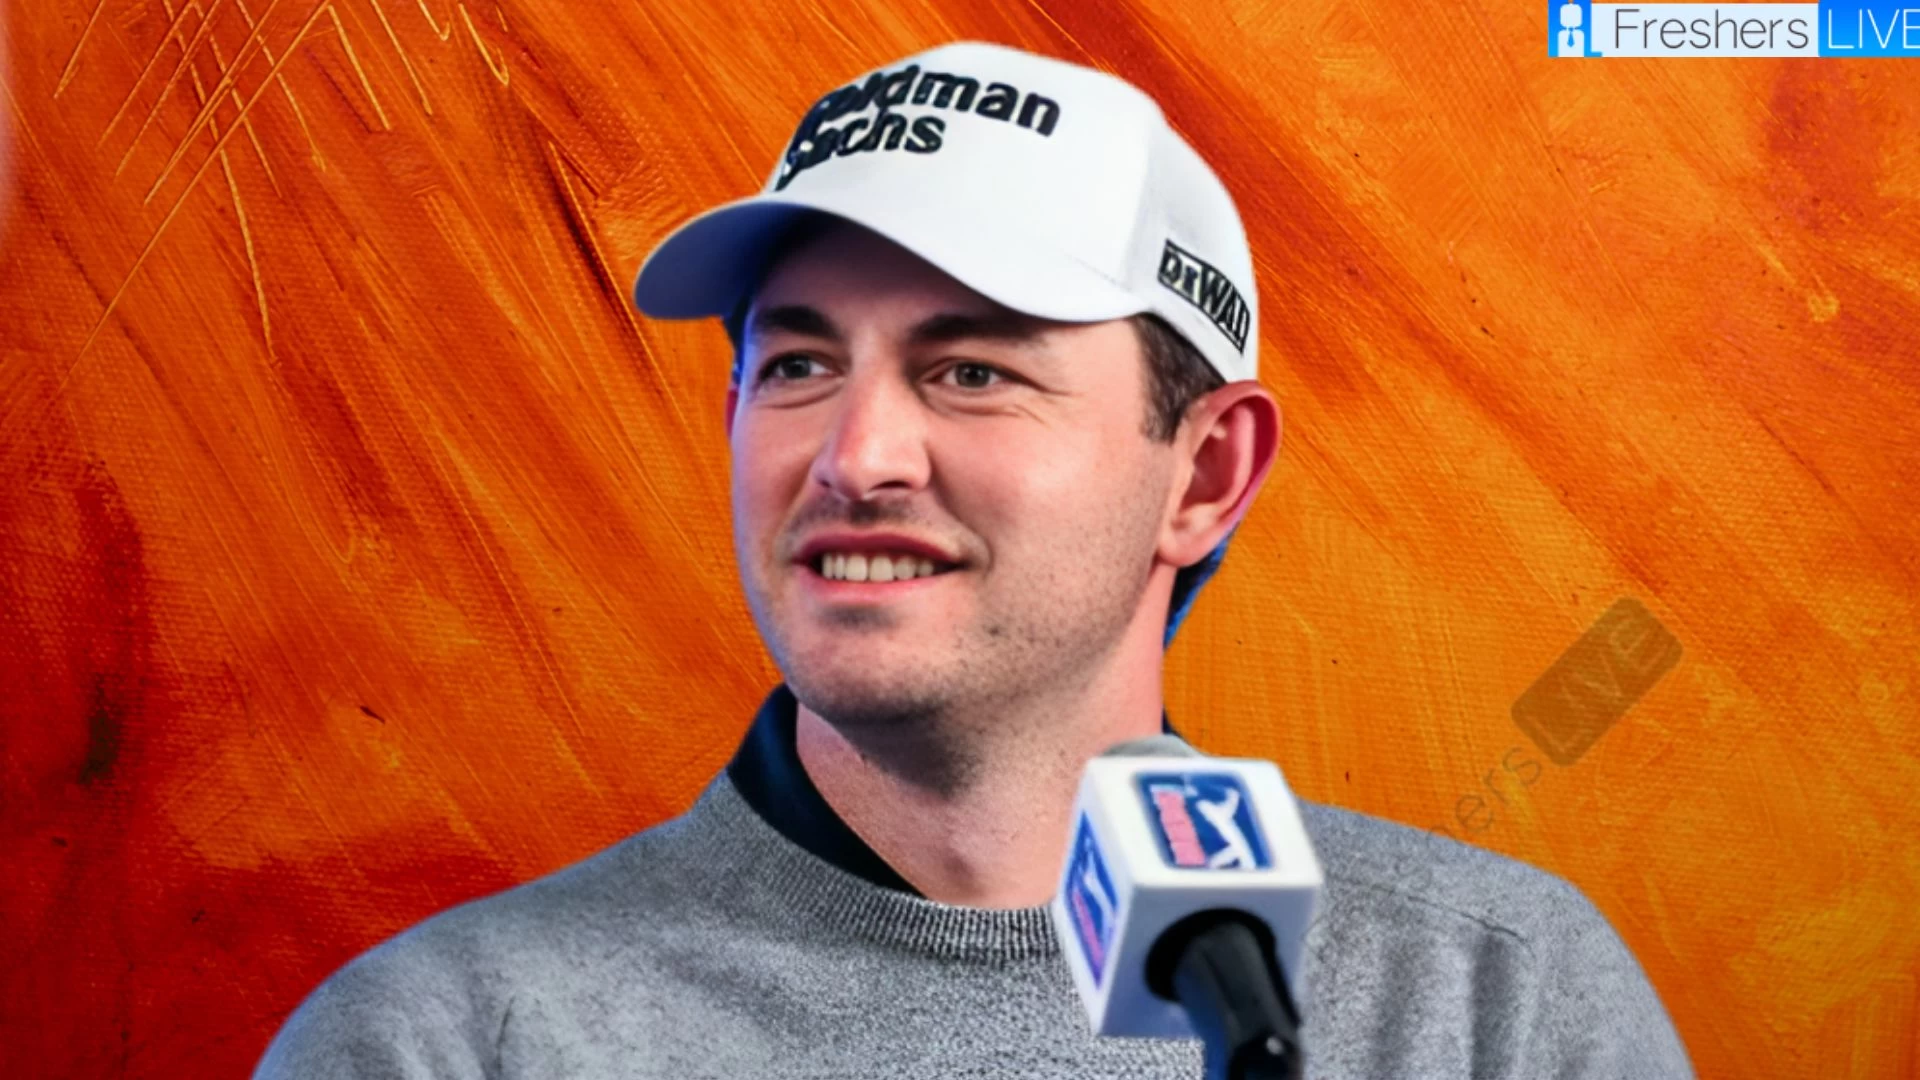 Patrick Cantlay Religion What Religion is Patrick Cantlay? Is Patrick Cantlay a Christian?